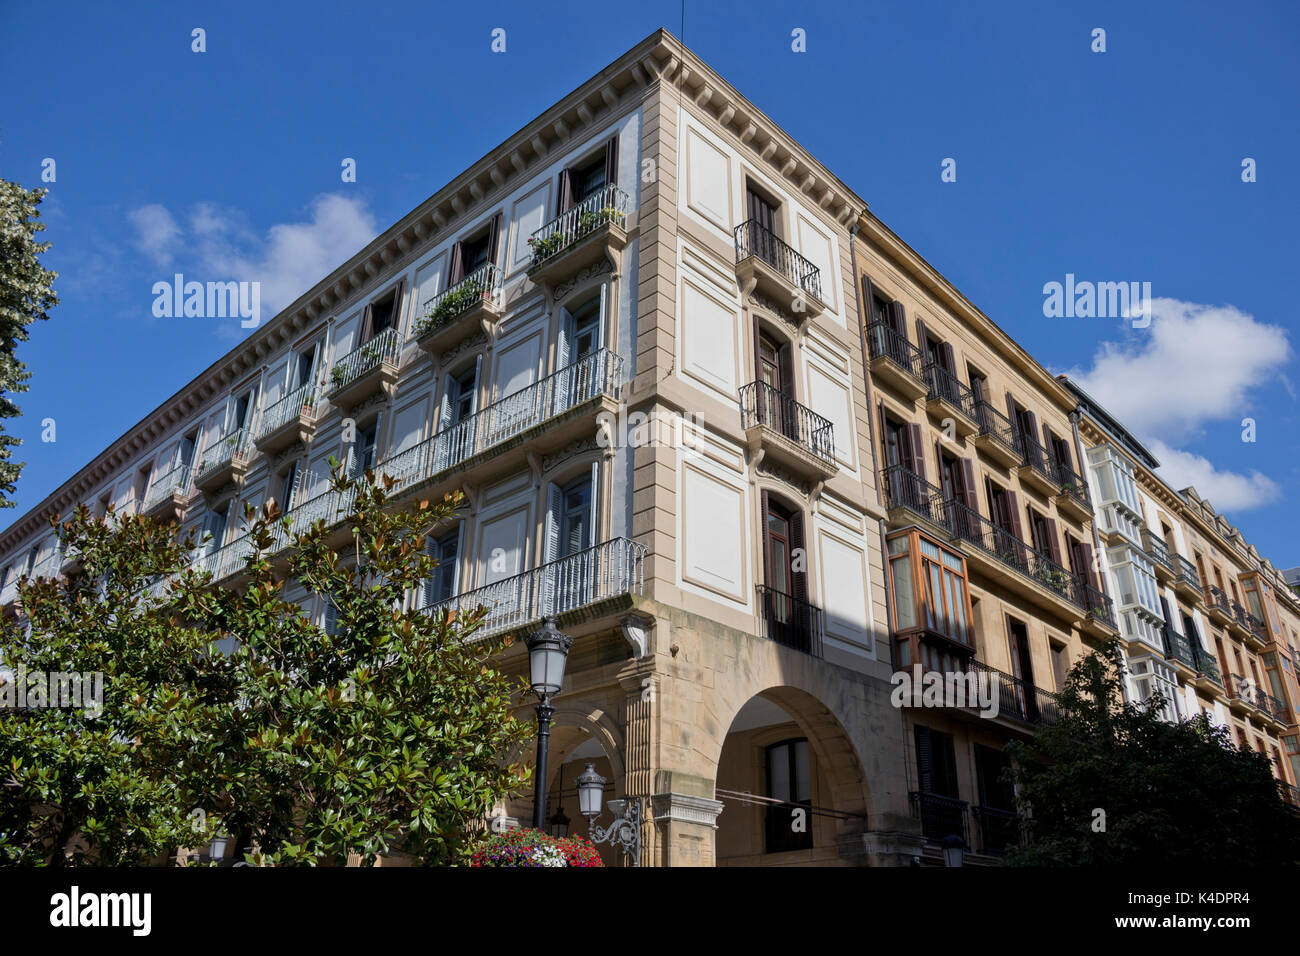 Two point perspective of an old building (Donostia, Guipuzcoa). Stock Photo